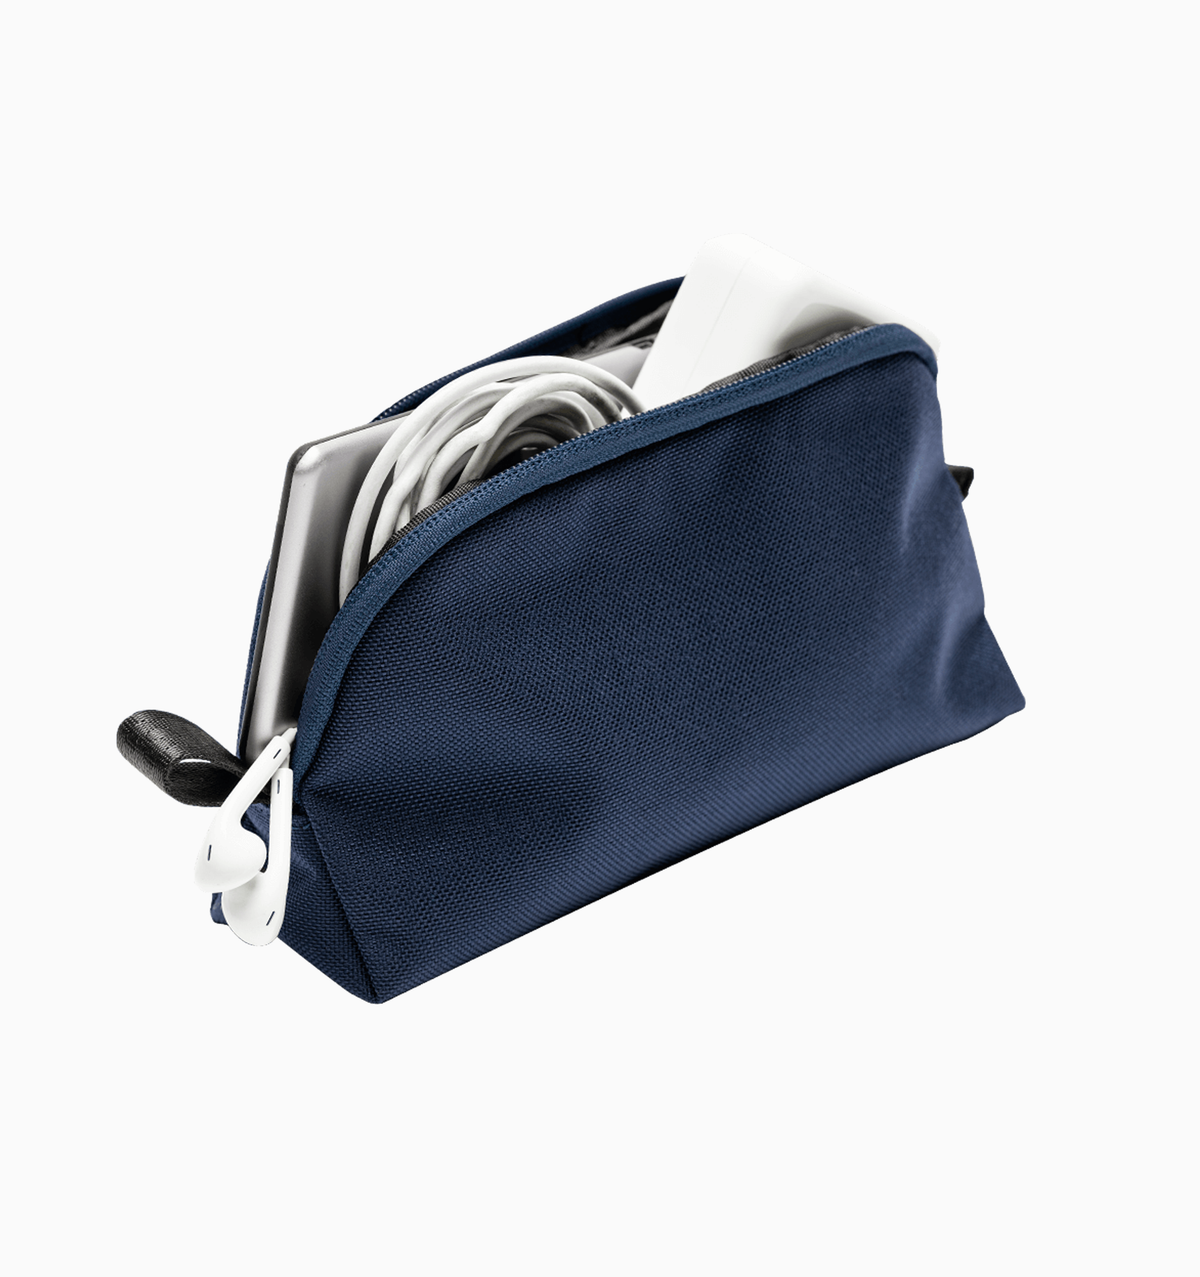 Able Carry Stash Pouch - Cordura Navy